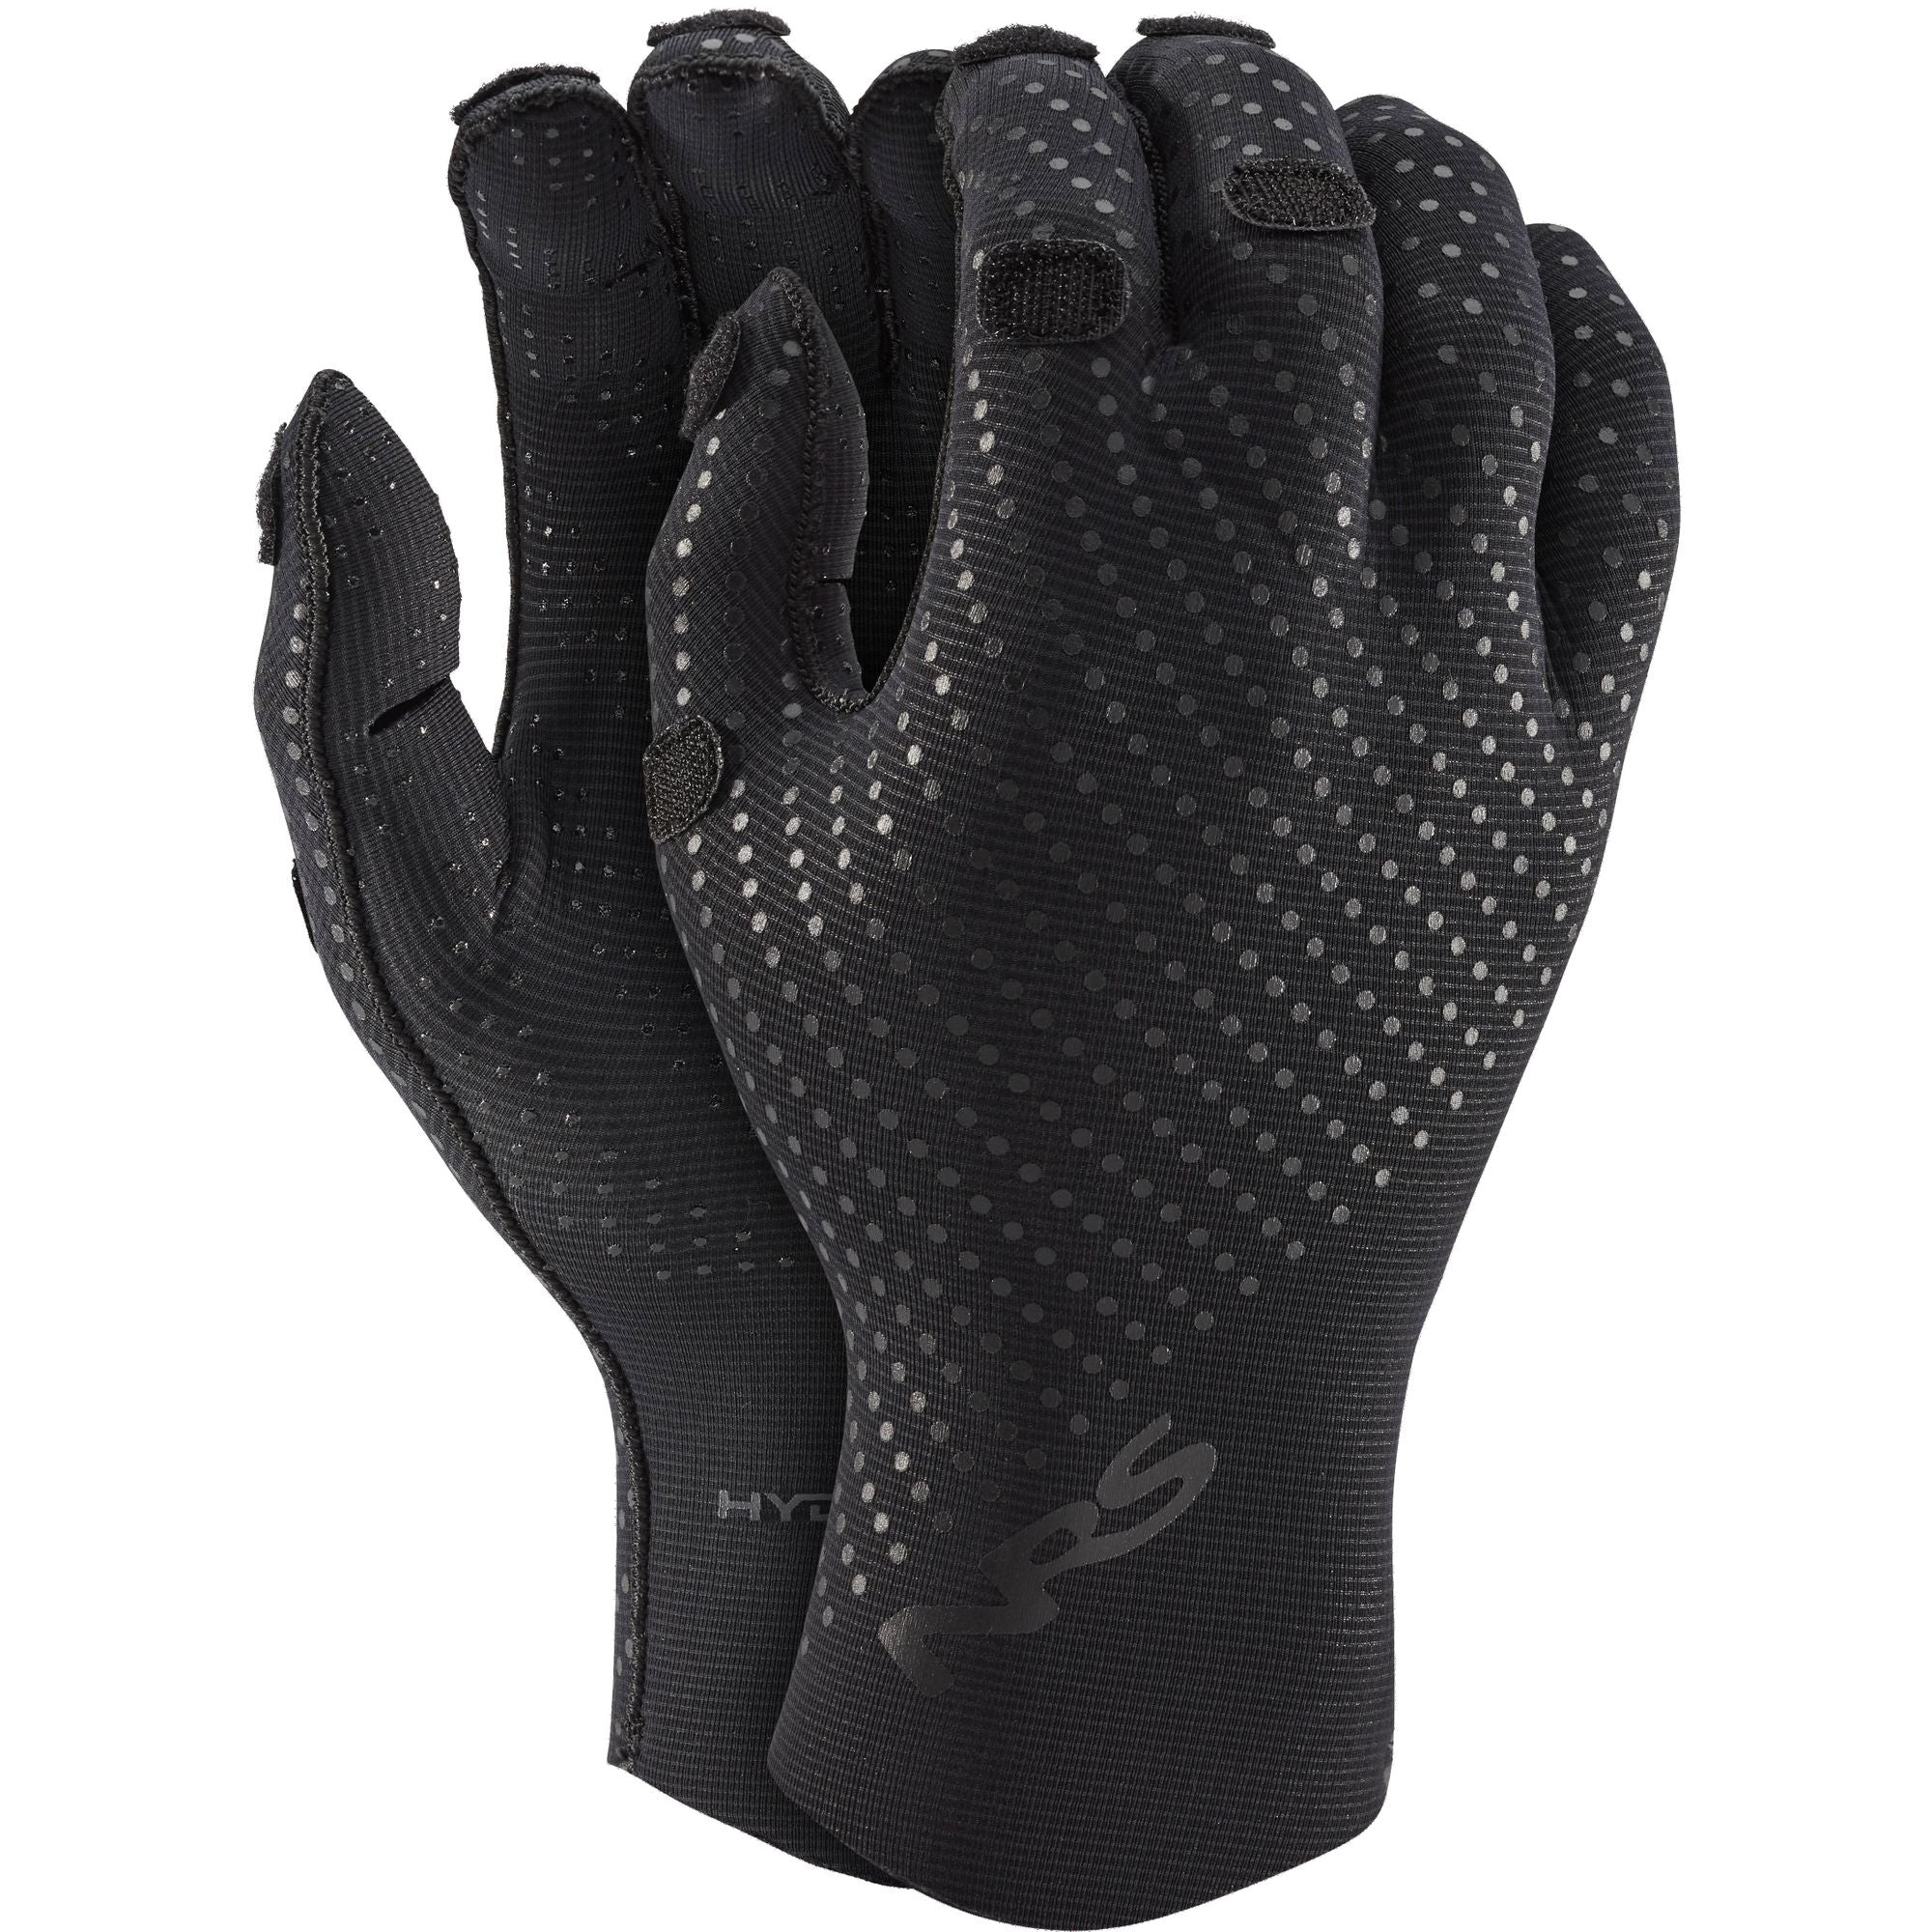 NRS Hydroskin 2.0 Forecast Gloves - Closeout